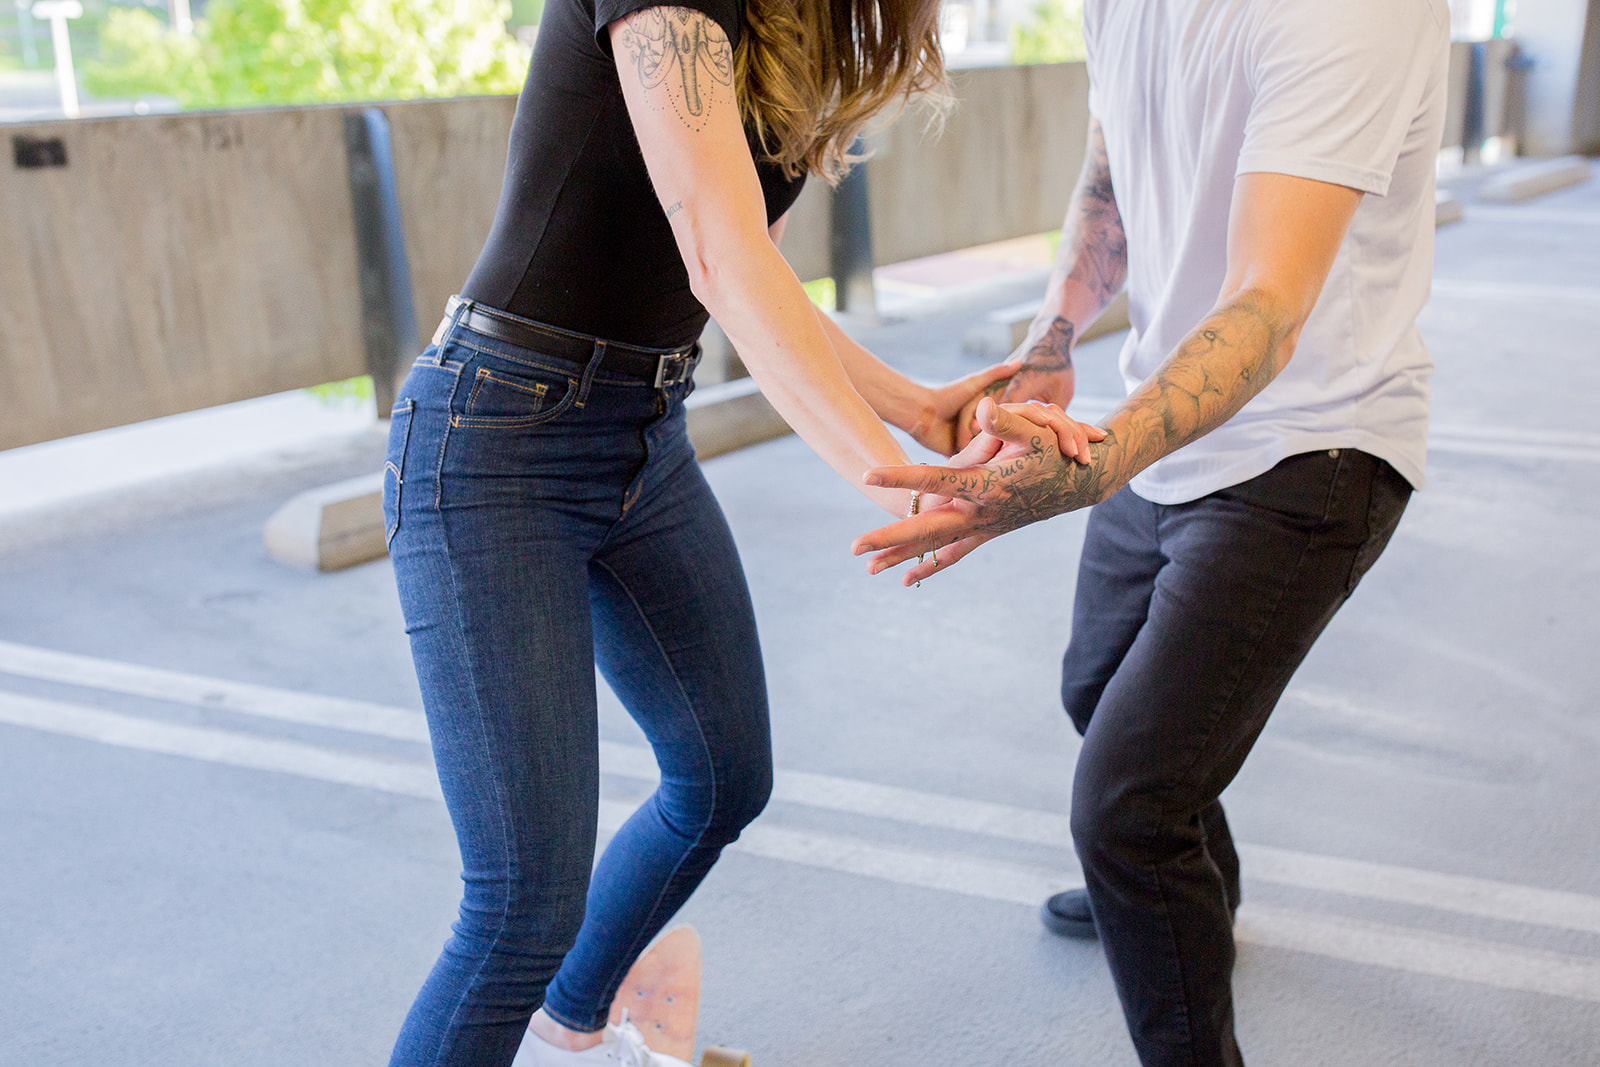 Couple goofs off on a skateboard in front of their photographer during their photoshoot